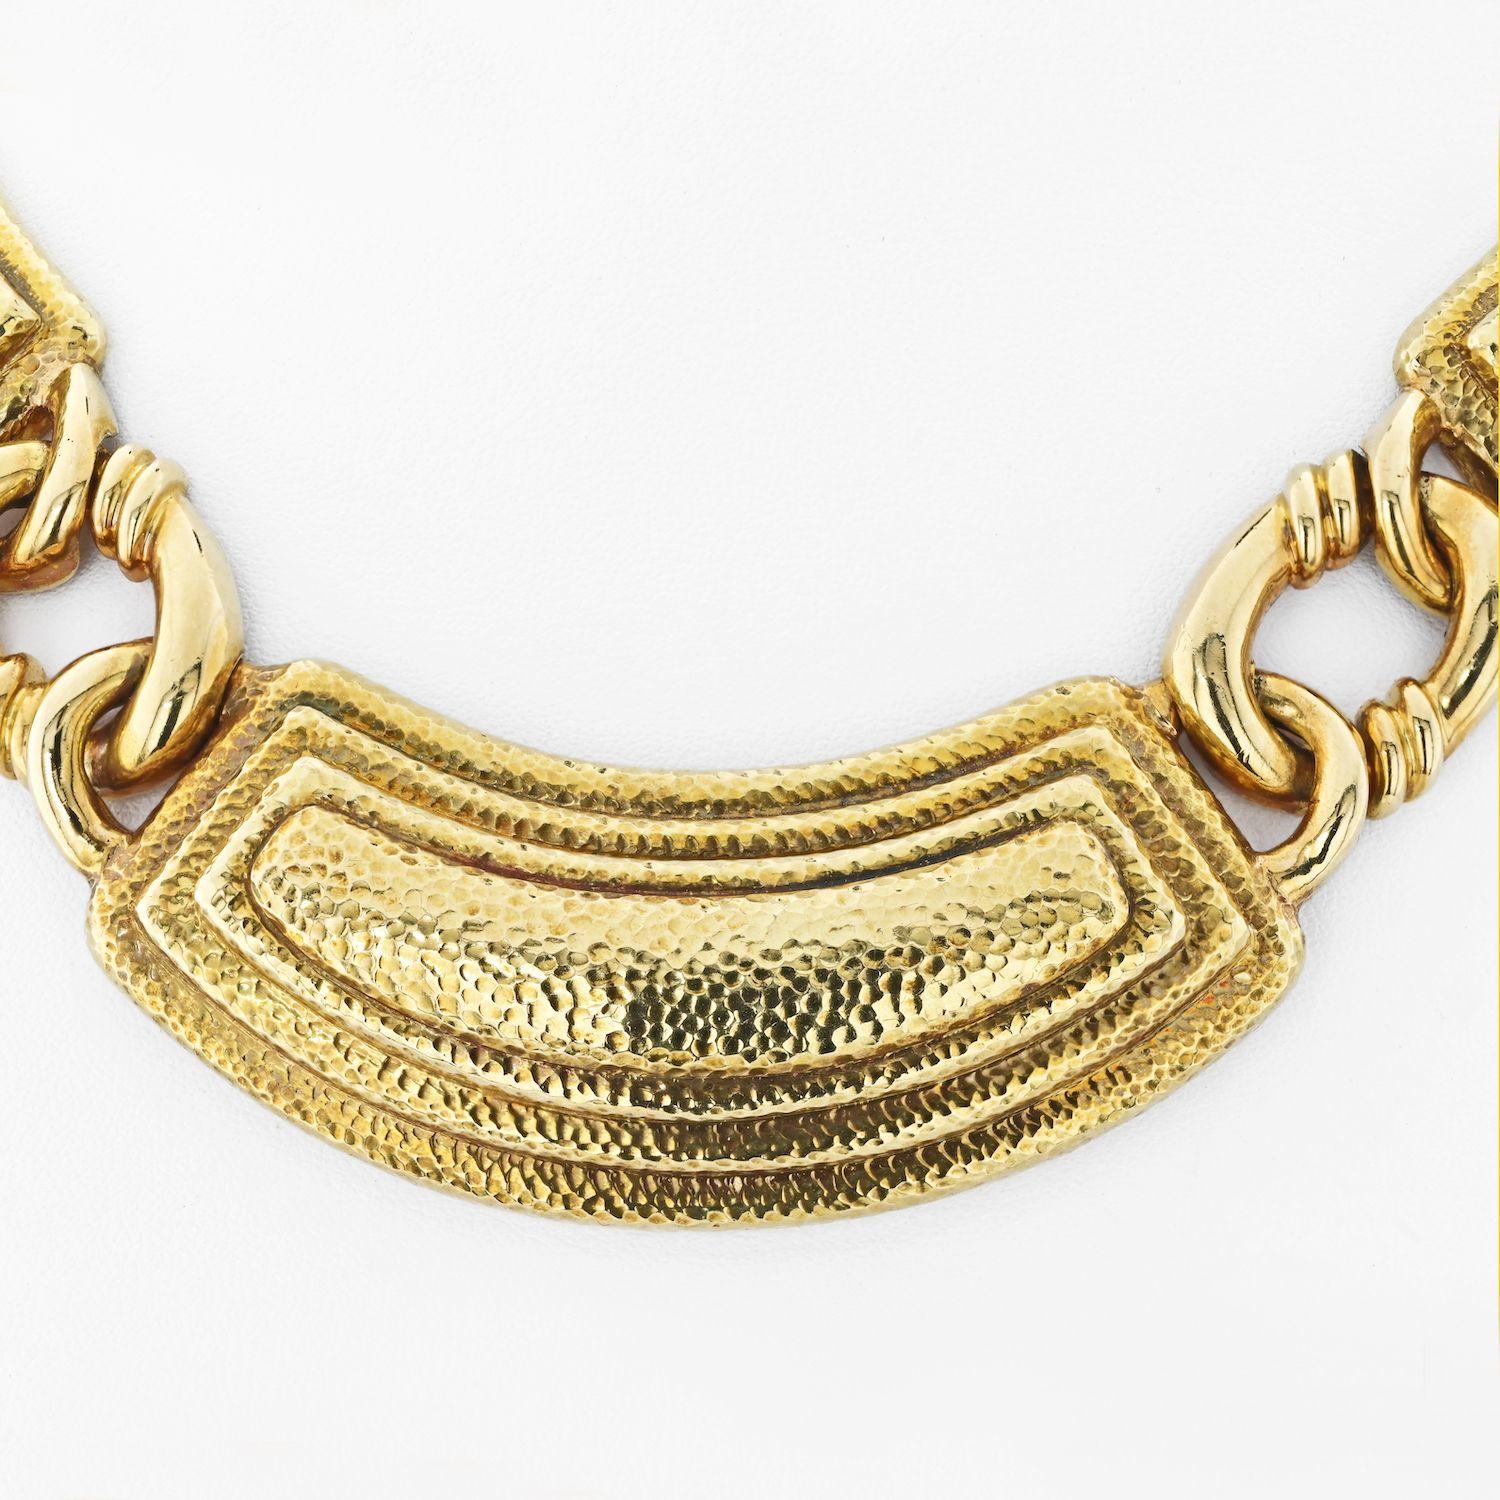 The David Webb 18K Yellow Gold Collar Ancient World Necklace is so wearable because it showcases a timeless design that can be easily incorporated into any outfit. The collar style provides a flattering fit for a range of necklines, while the